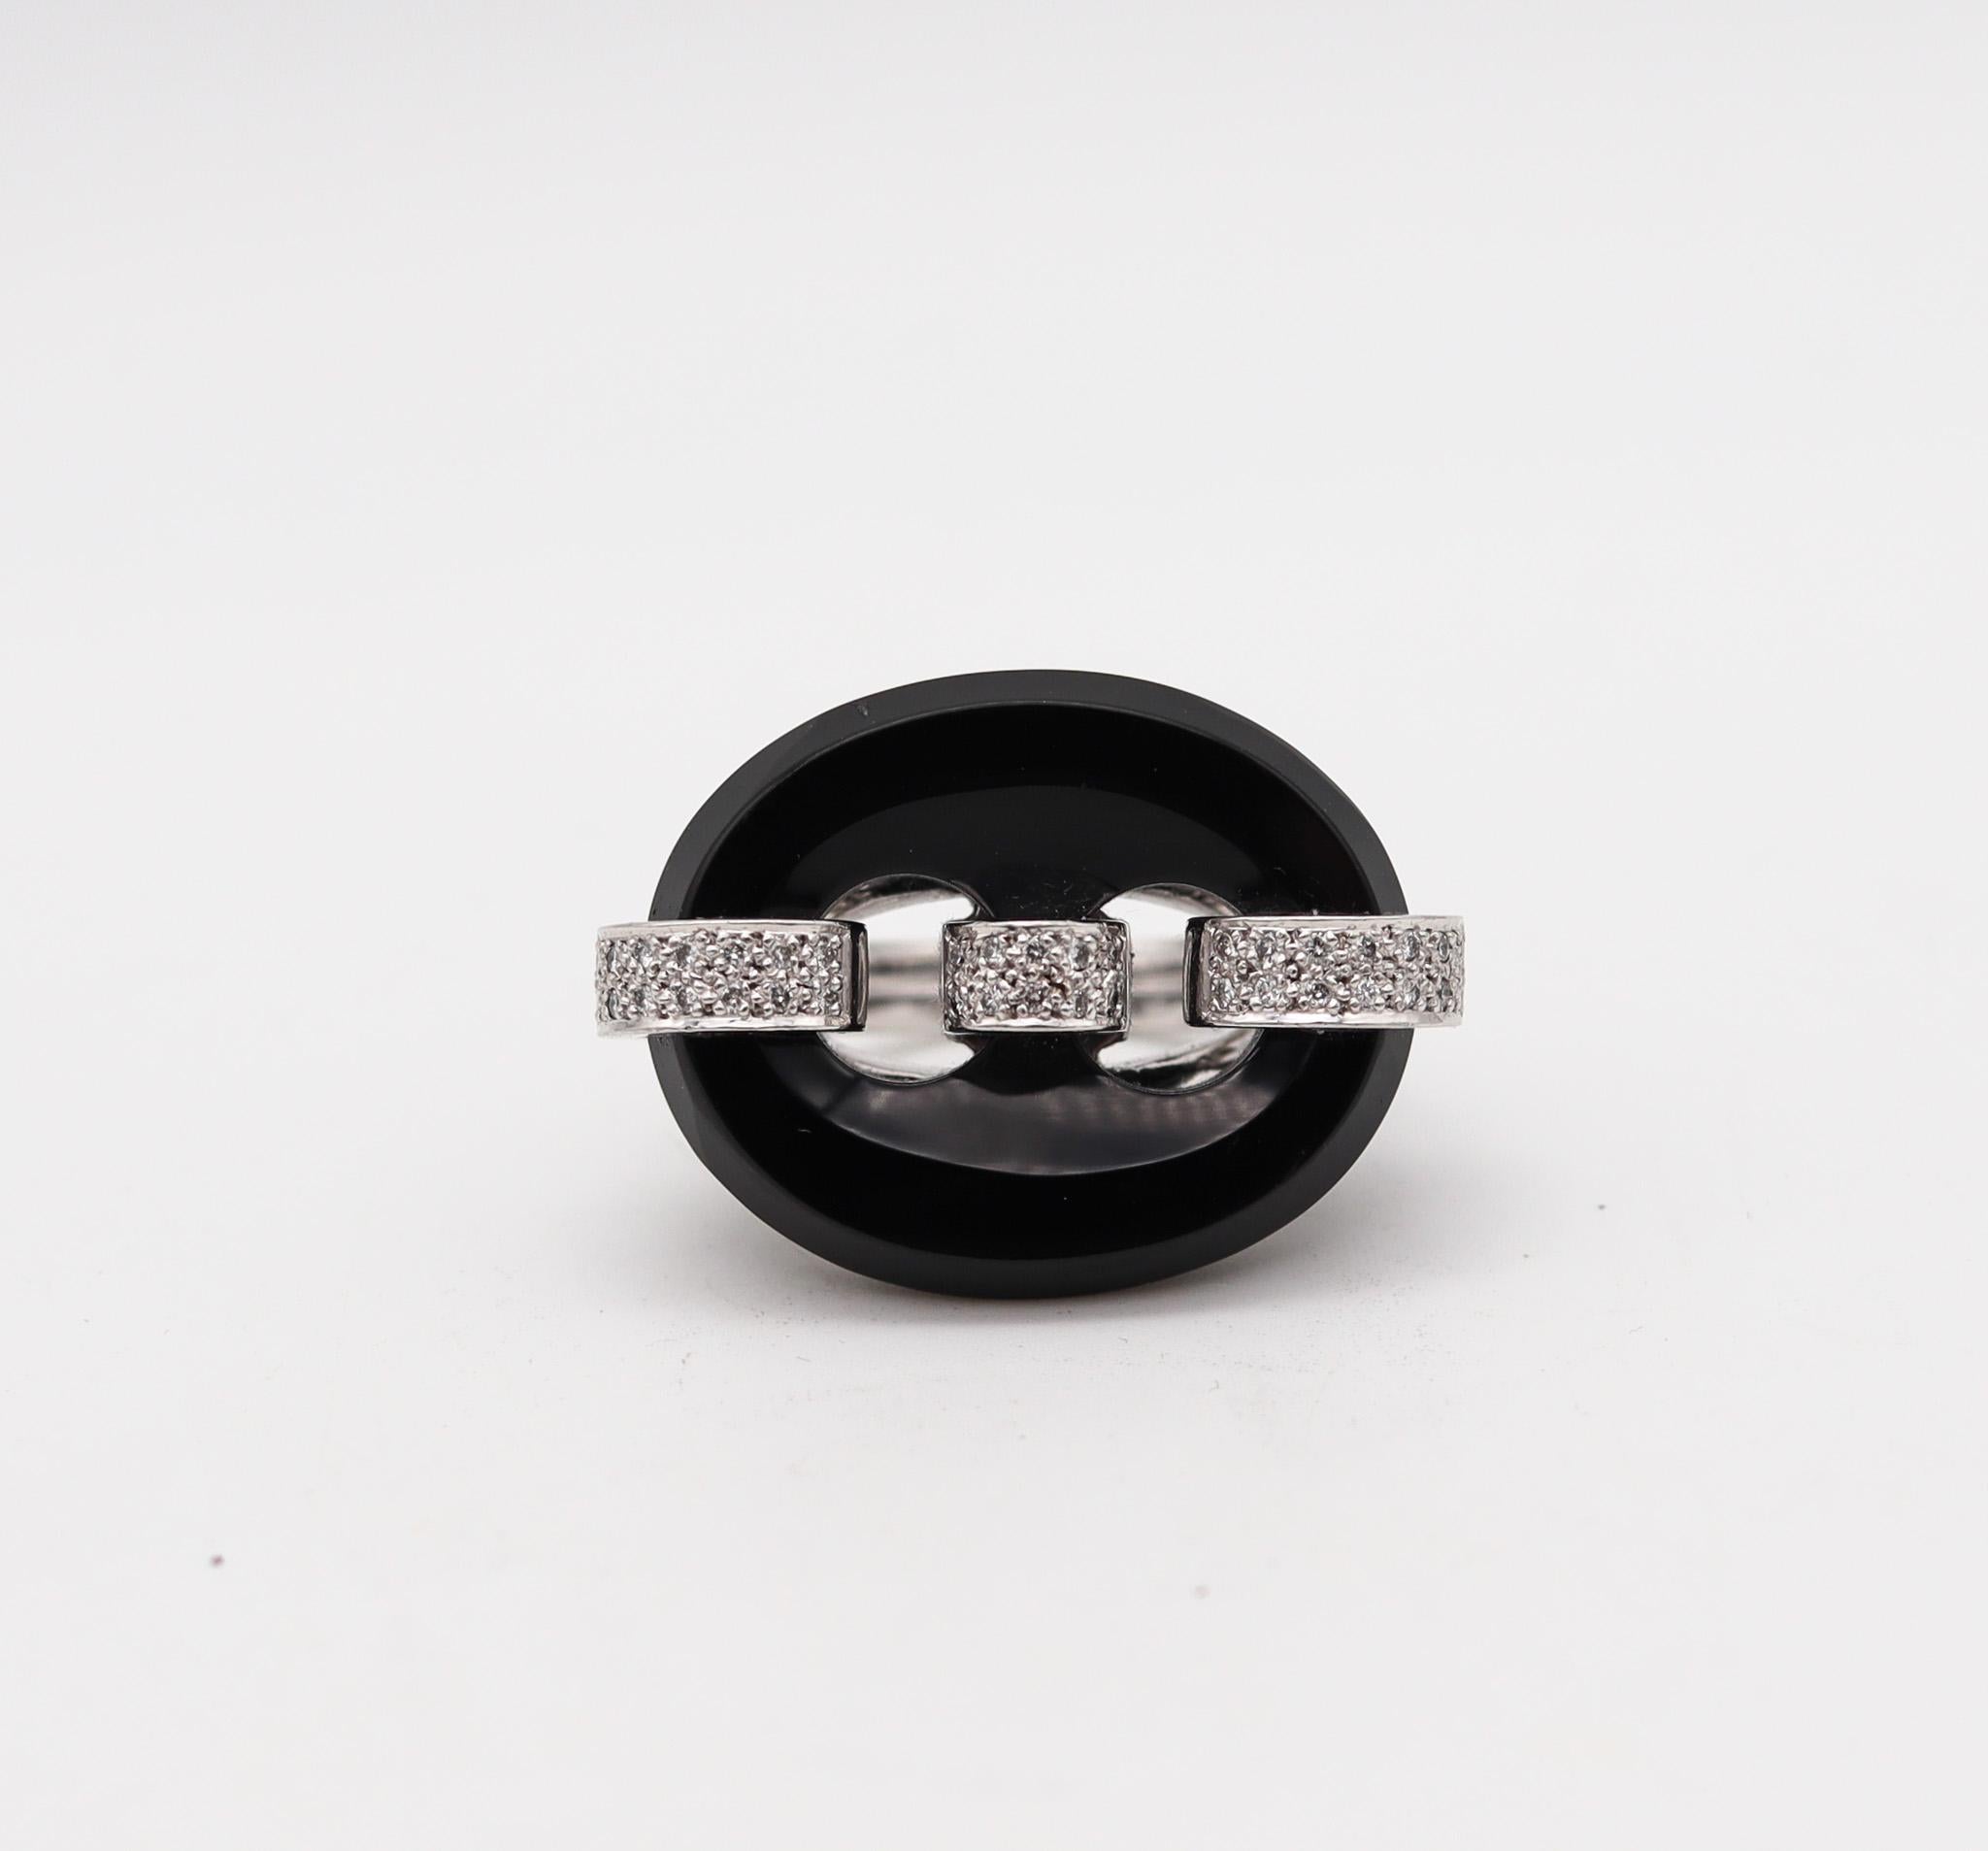 Modernist Midcentury 1950 Mariner Link Cocktail Ring in 18kt Gold with Diamonds and Onyx